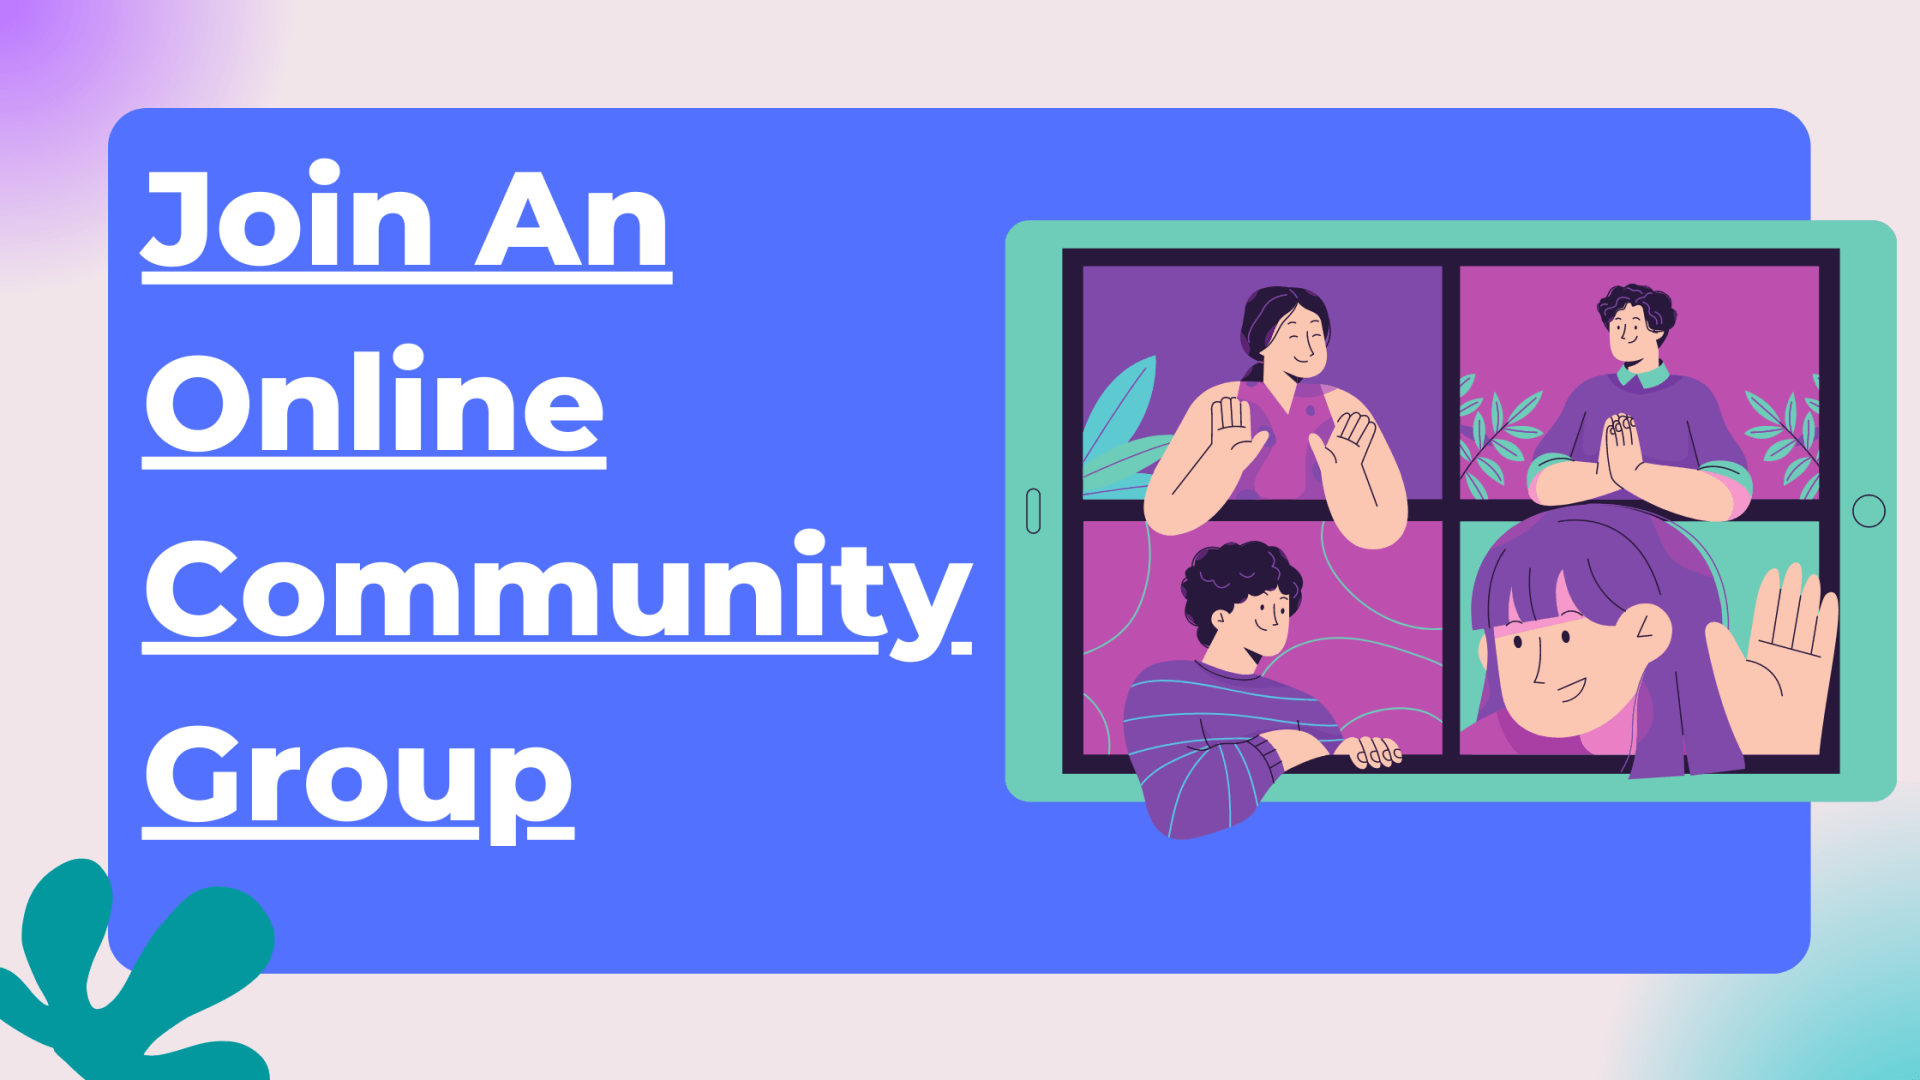 Join an online community group as a freelancer